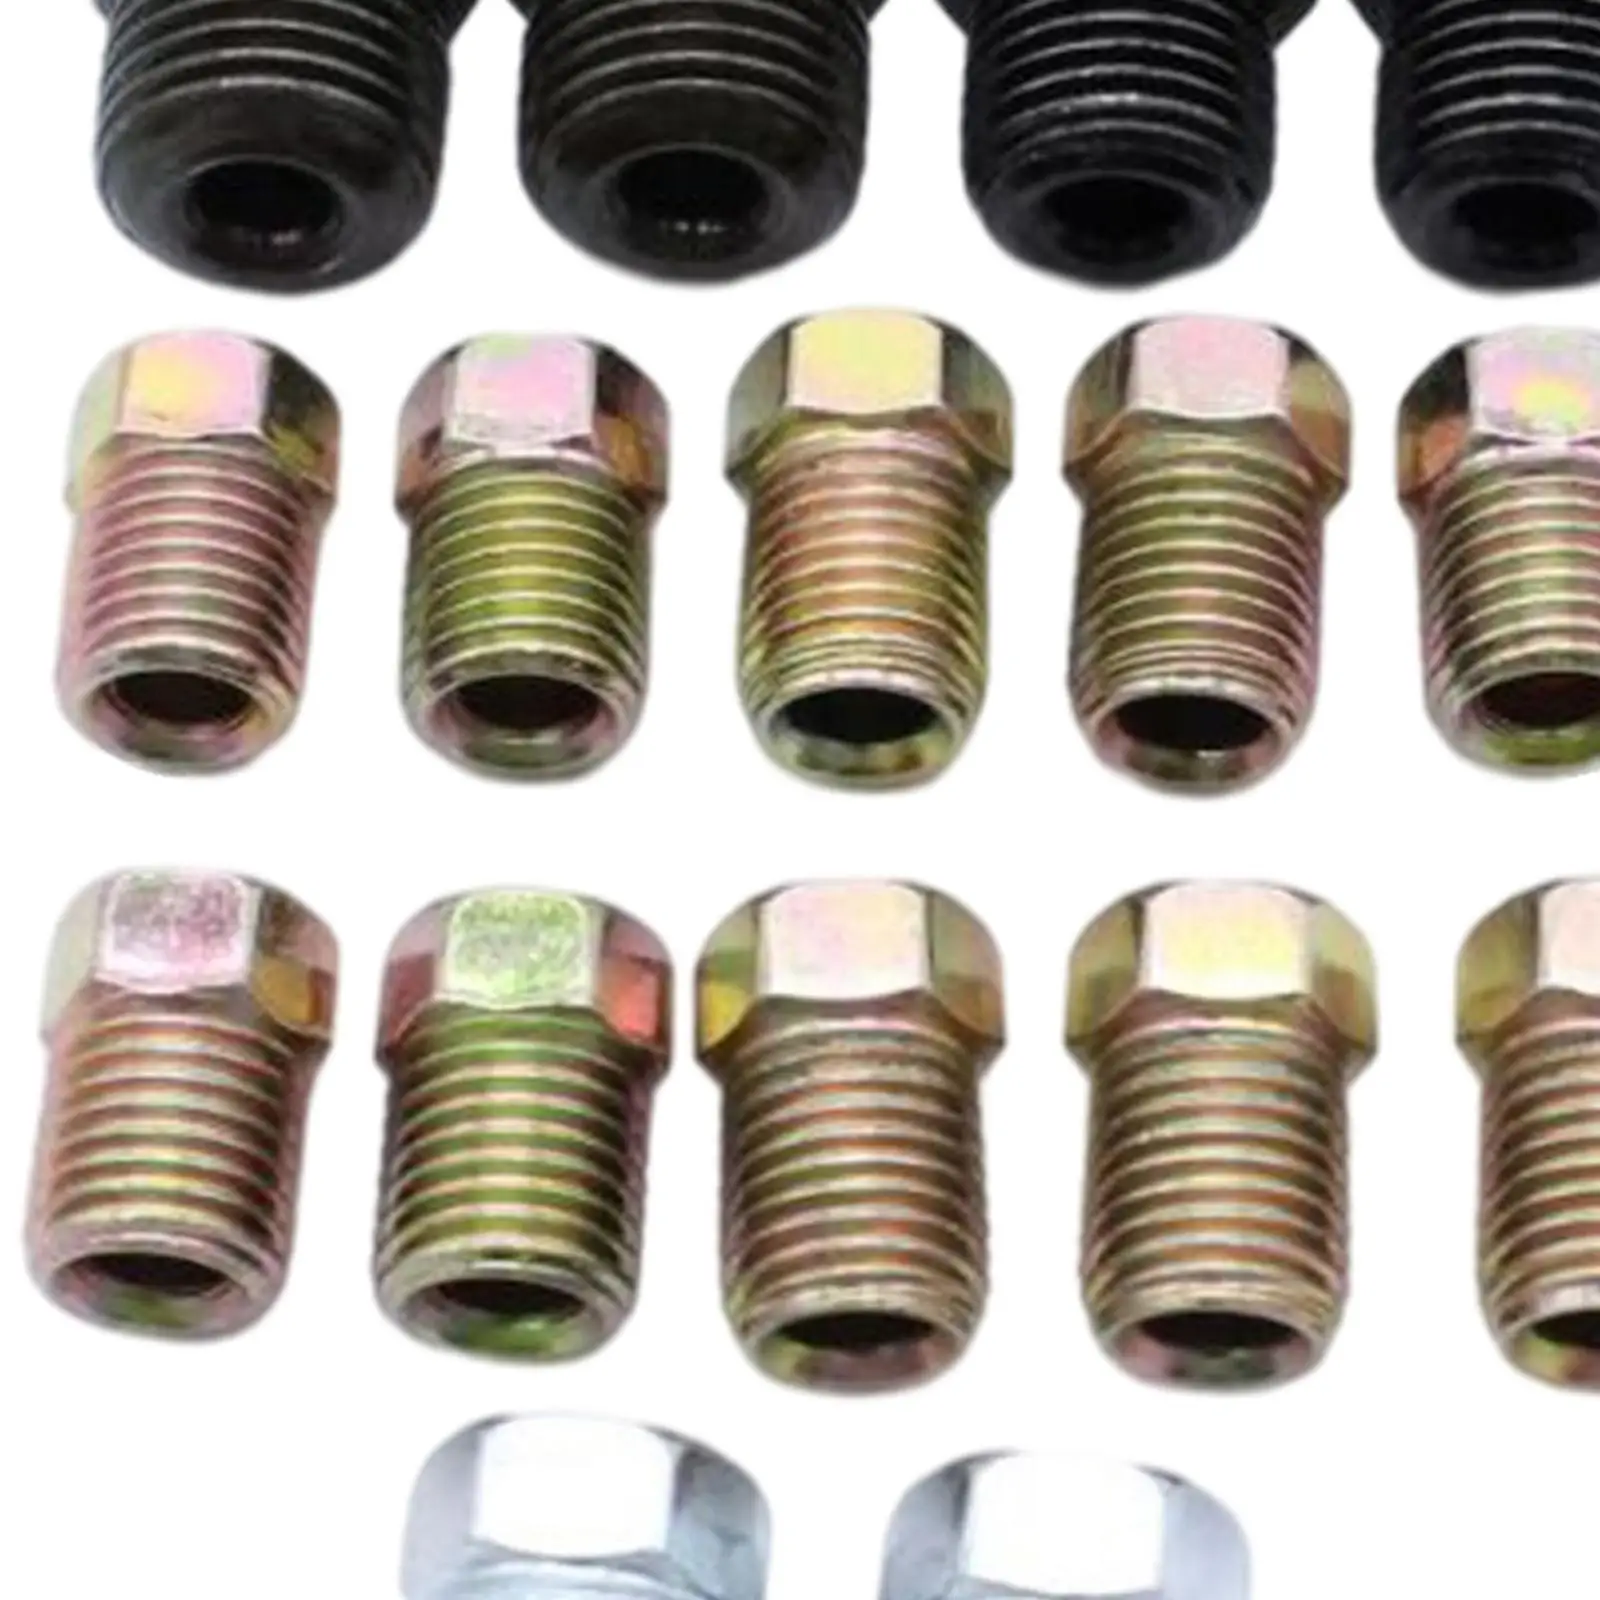 16-Pack Inverted Flare Tube Nuts Fit for 3/16 inch Tube Brake Line Systems